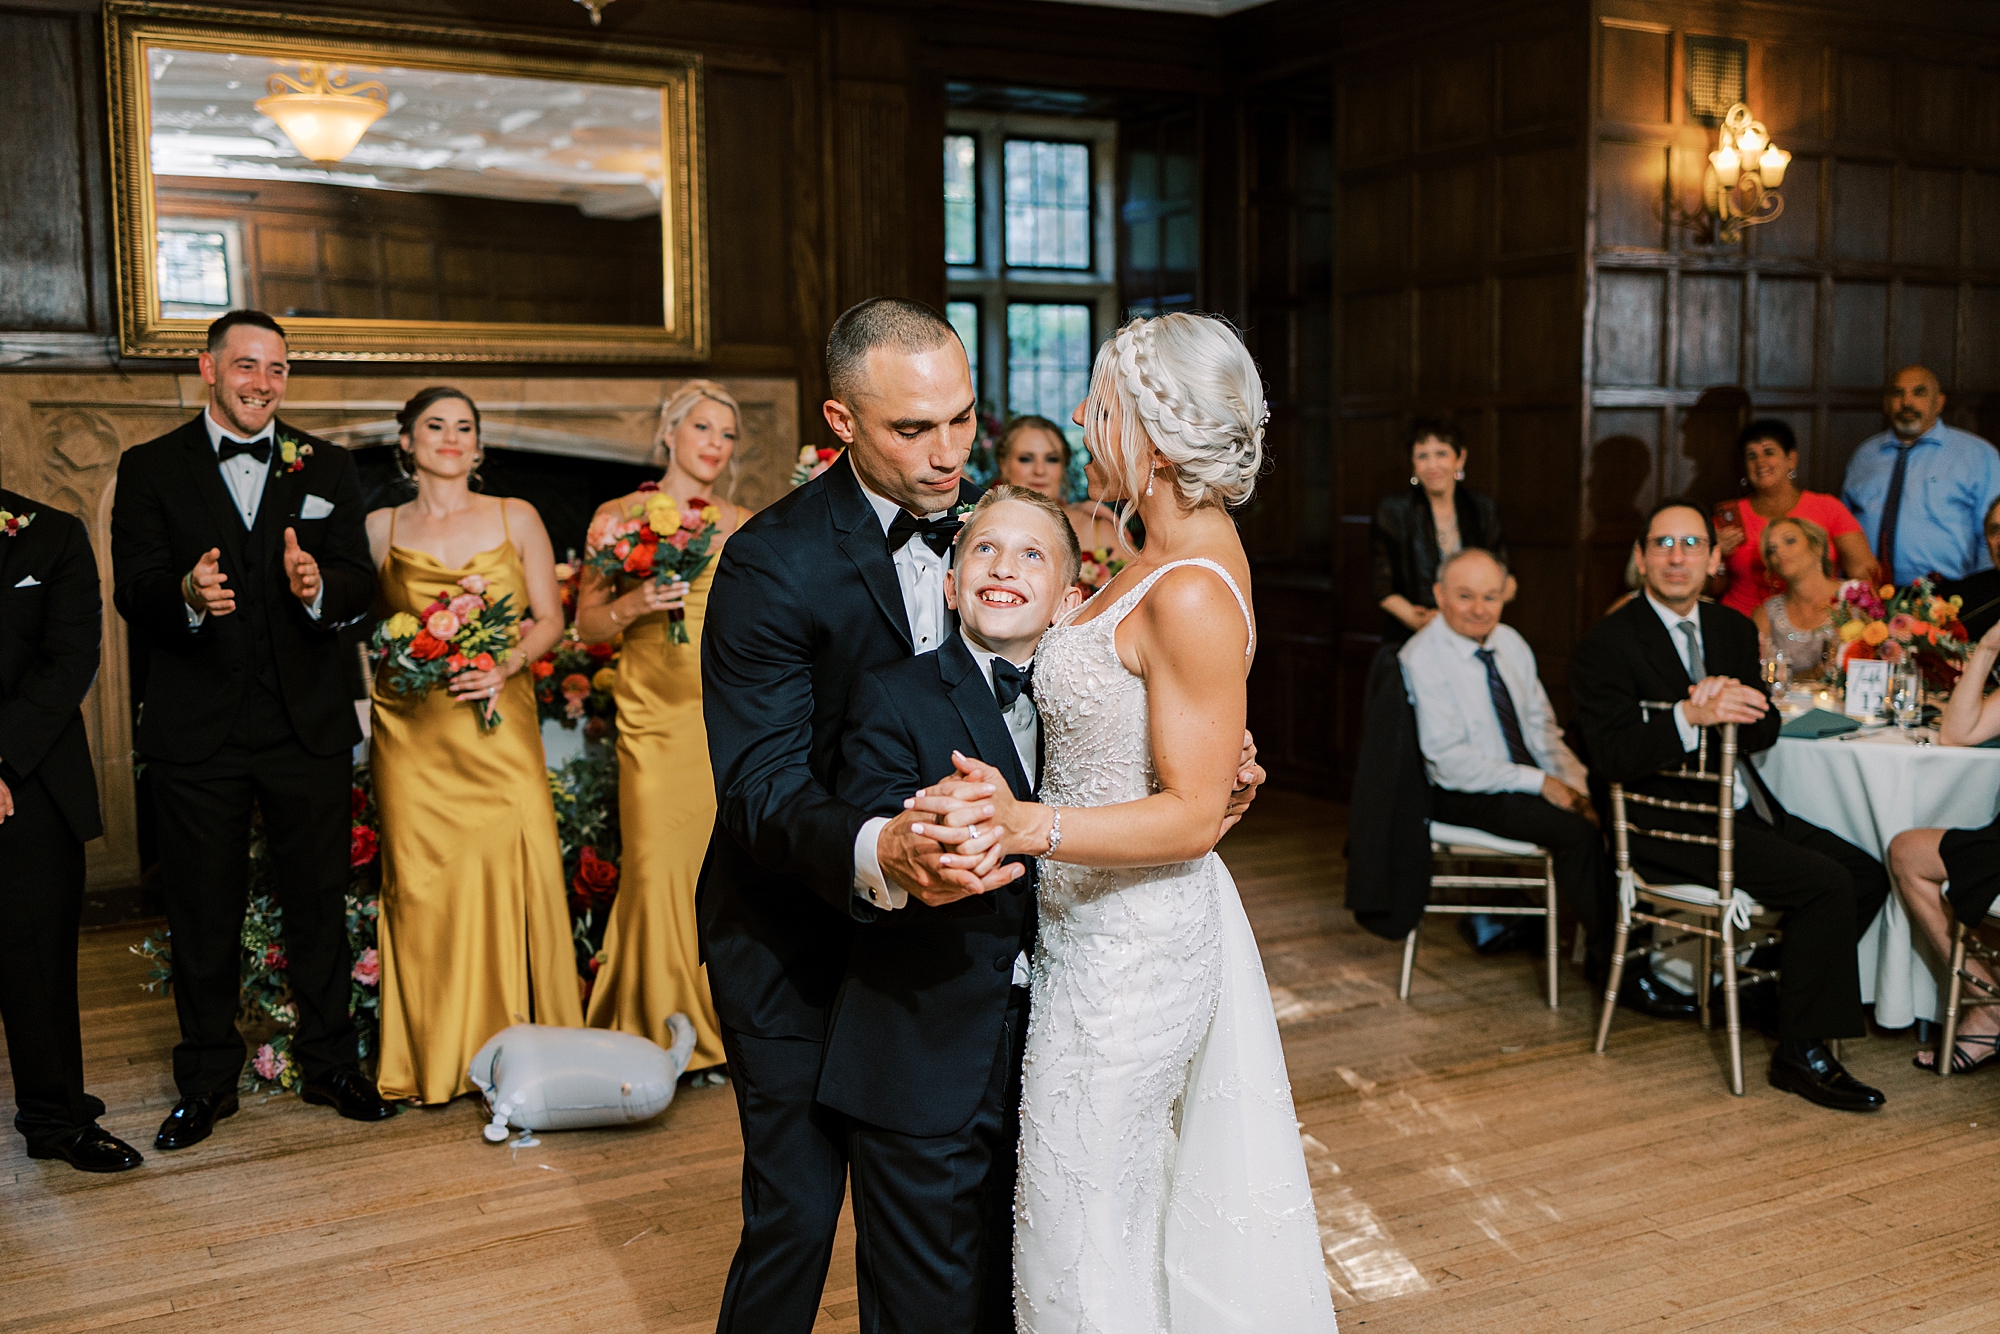 bride and groom dance with son at PA wedding reception 